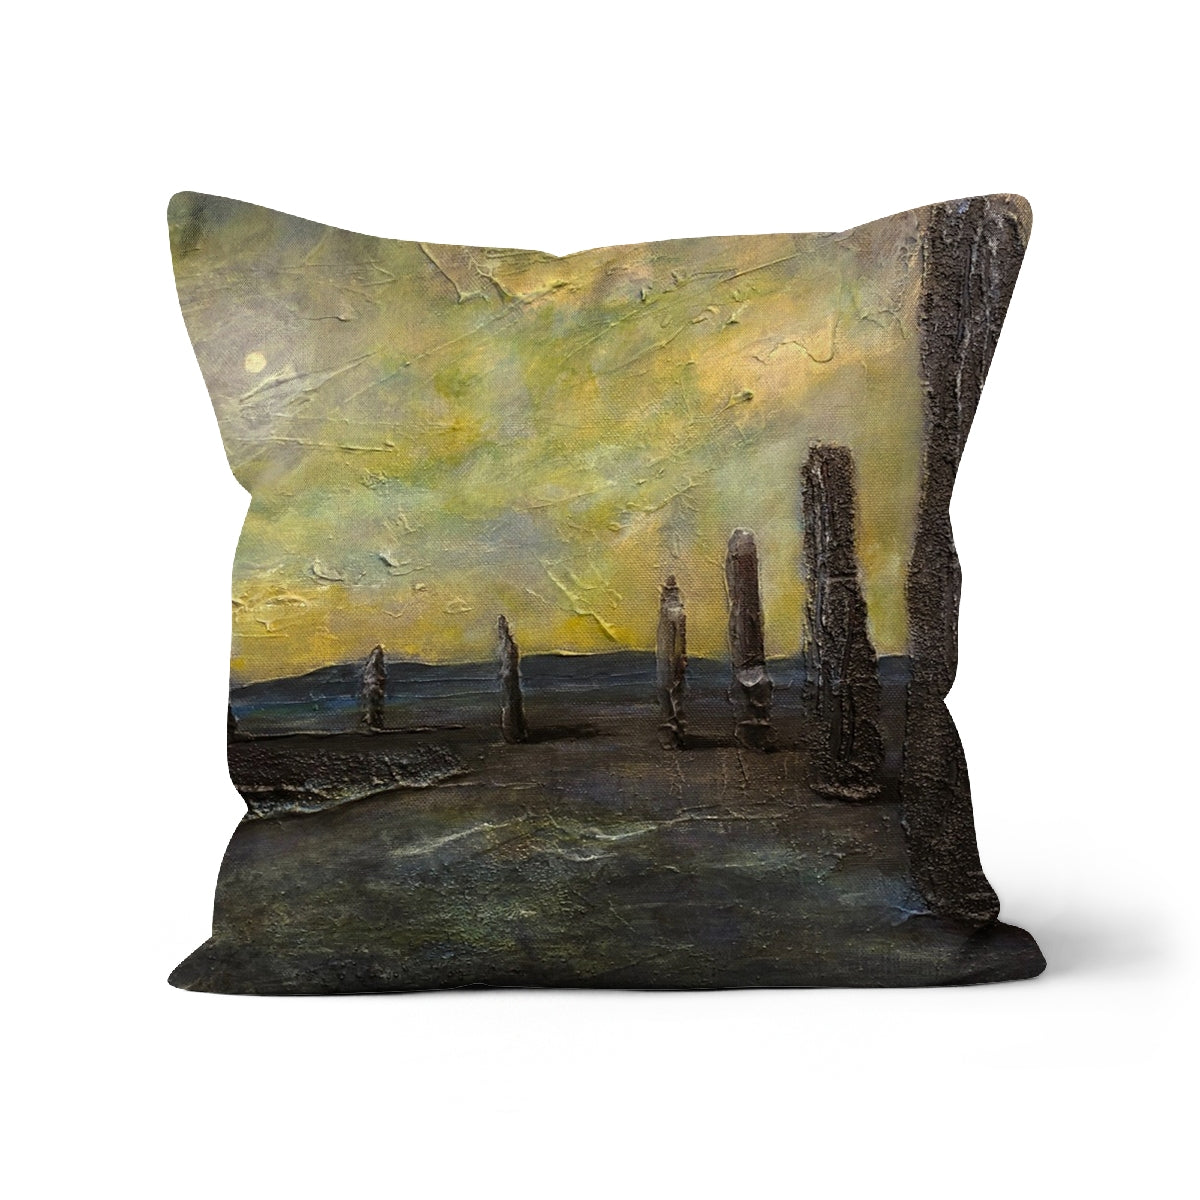 An Ethereal Ring Of Brodgar Art Gifts Cushion-Cushions-Orkney Art Gallery-Linen-24"x24"-Paintings, Prints, Homeware, Art Gifts From Scotland By Scottish Artist Kevin Hunter